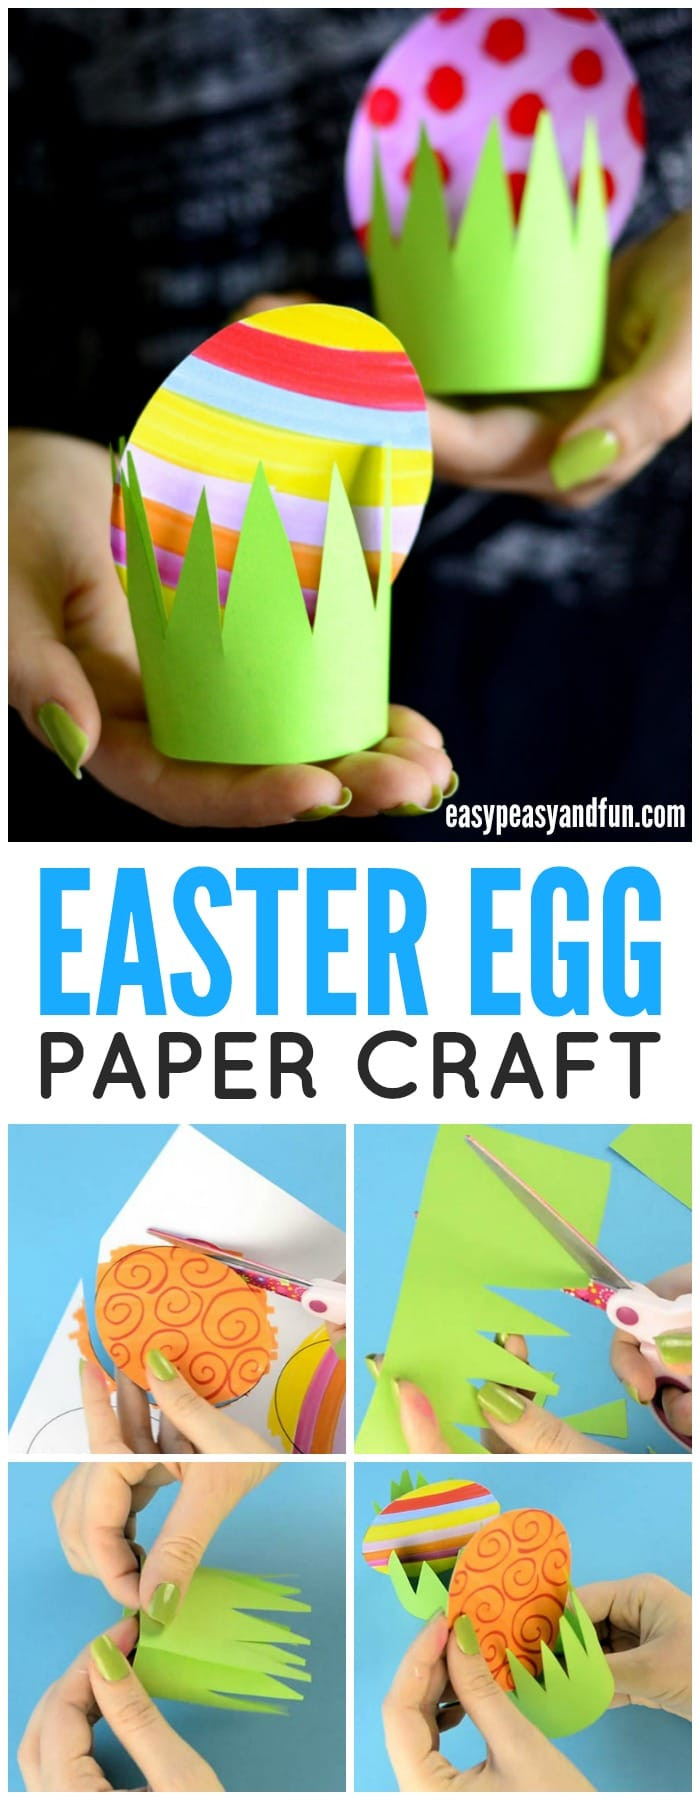 Easter Egg Craft
 Paper Easter Egg Craft Idea Easy Peasy and Fun